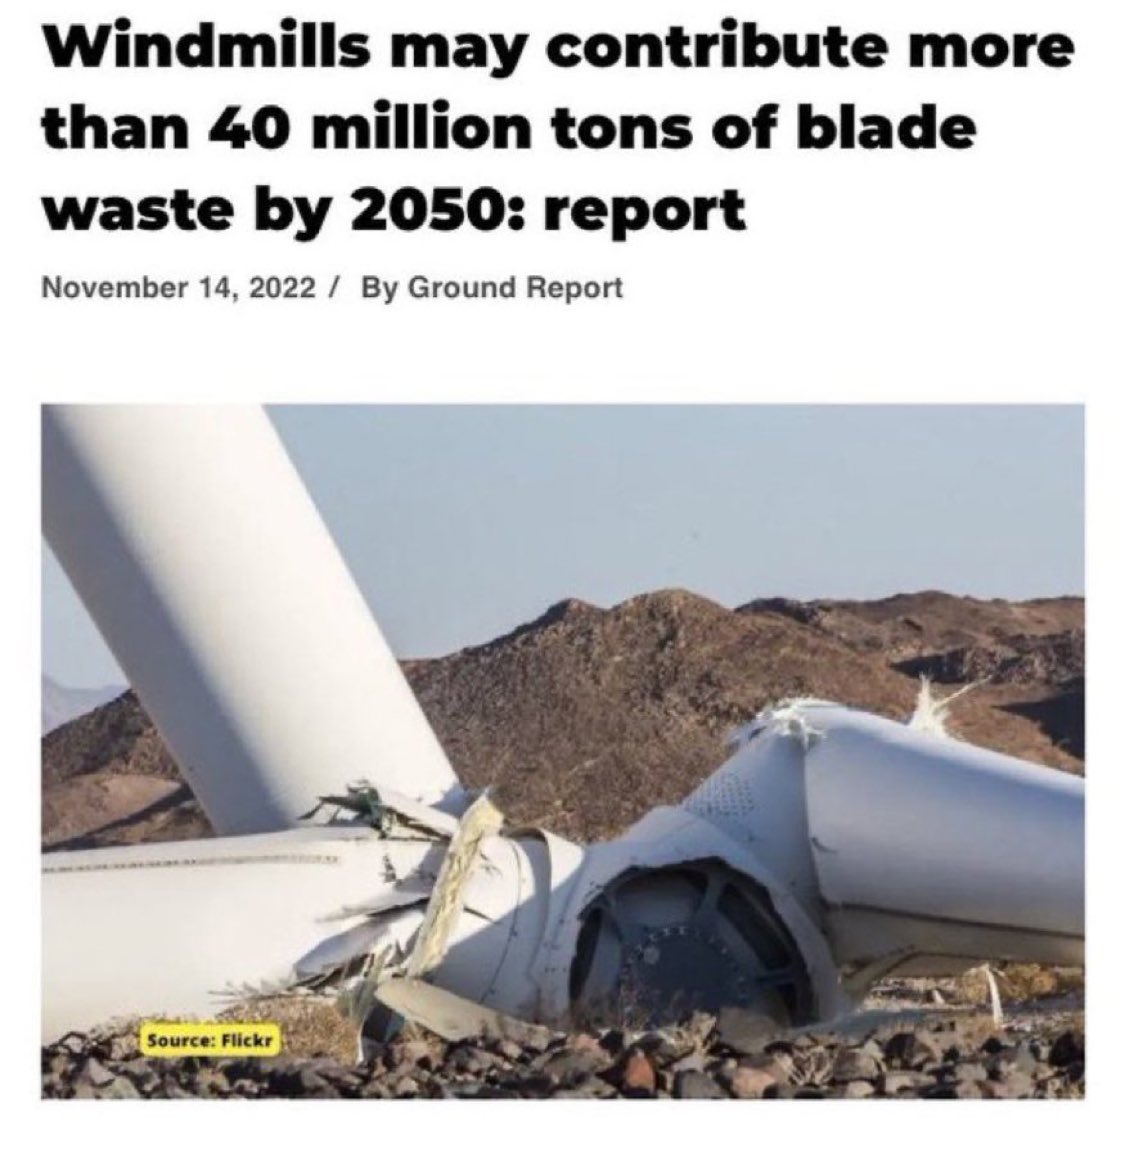 Wind turbines have a life span of approximately 20 years. Tens of thousands of old turbines could end up in landfill by the end of the decade. Turbine blades are set to account for more than 40 million tonnes of waste by 2050. Not exactly a sustainable outcome.